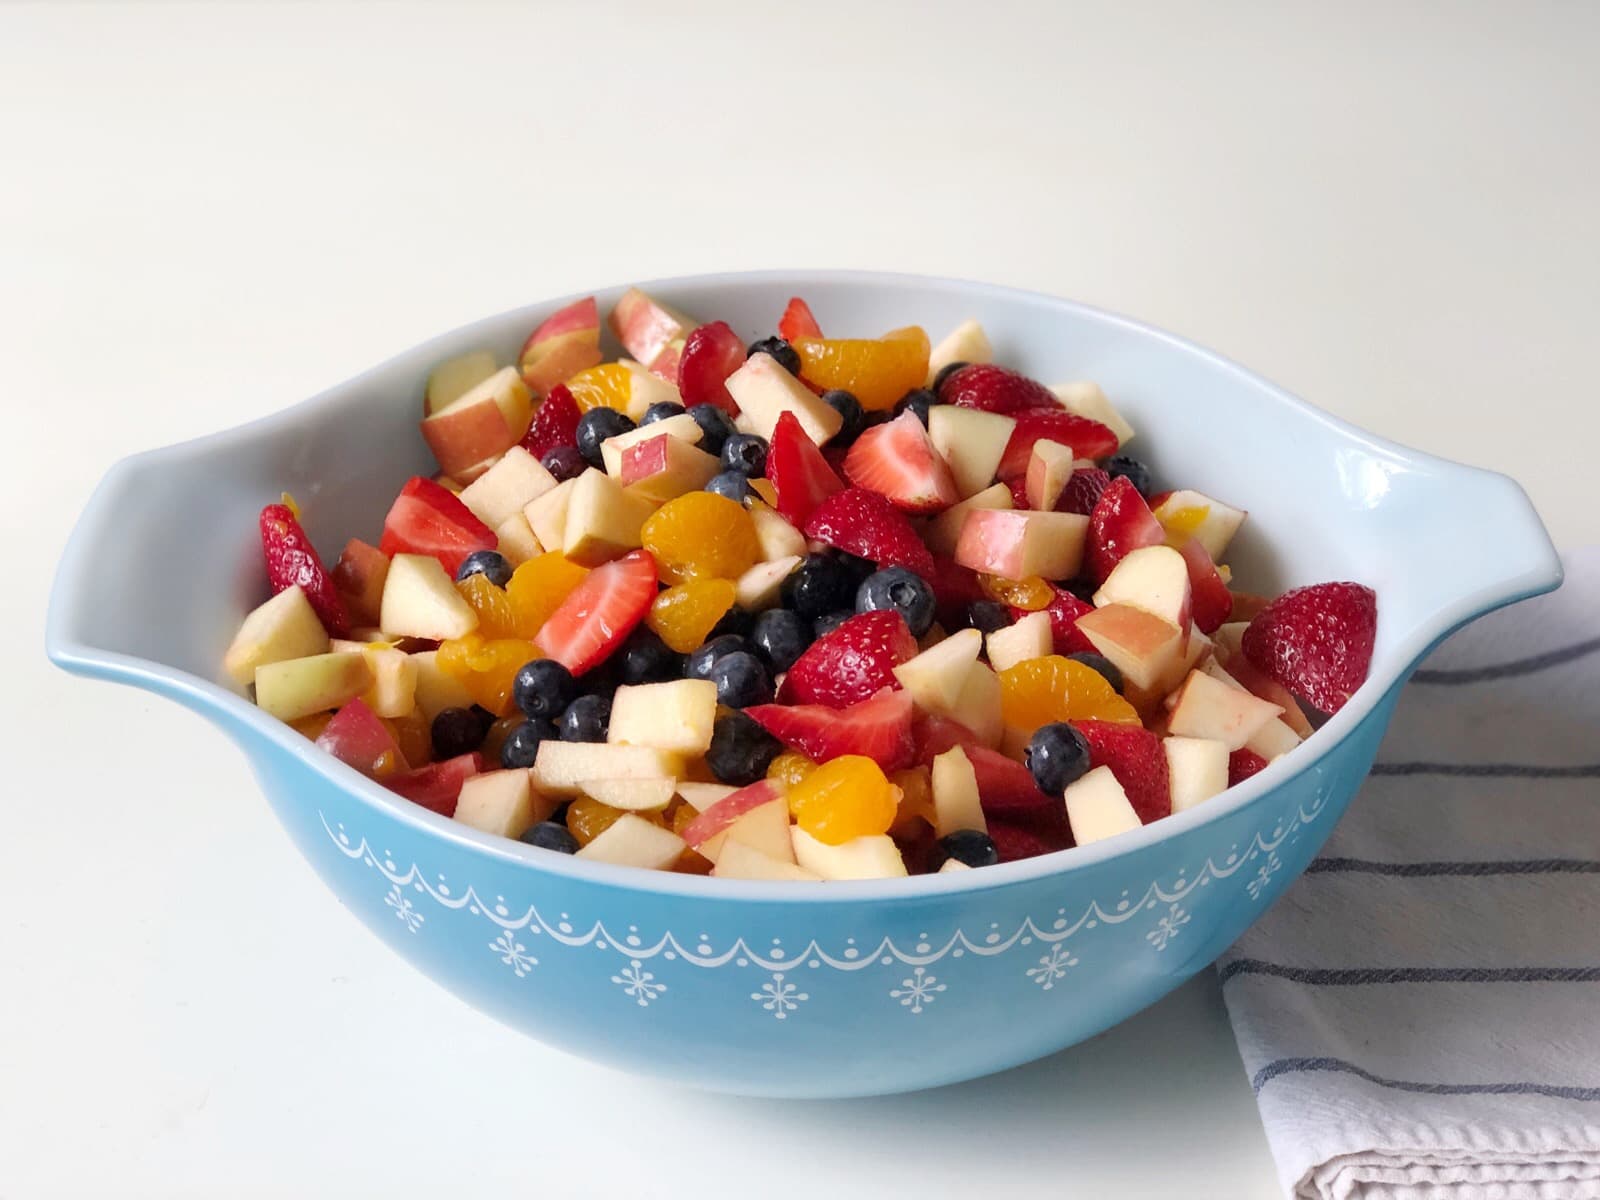 Wondering how to make fruit salad? Use this fruit salad recipe for get-togethers, parties, a side dish for grilling out, or a snack on the go.